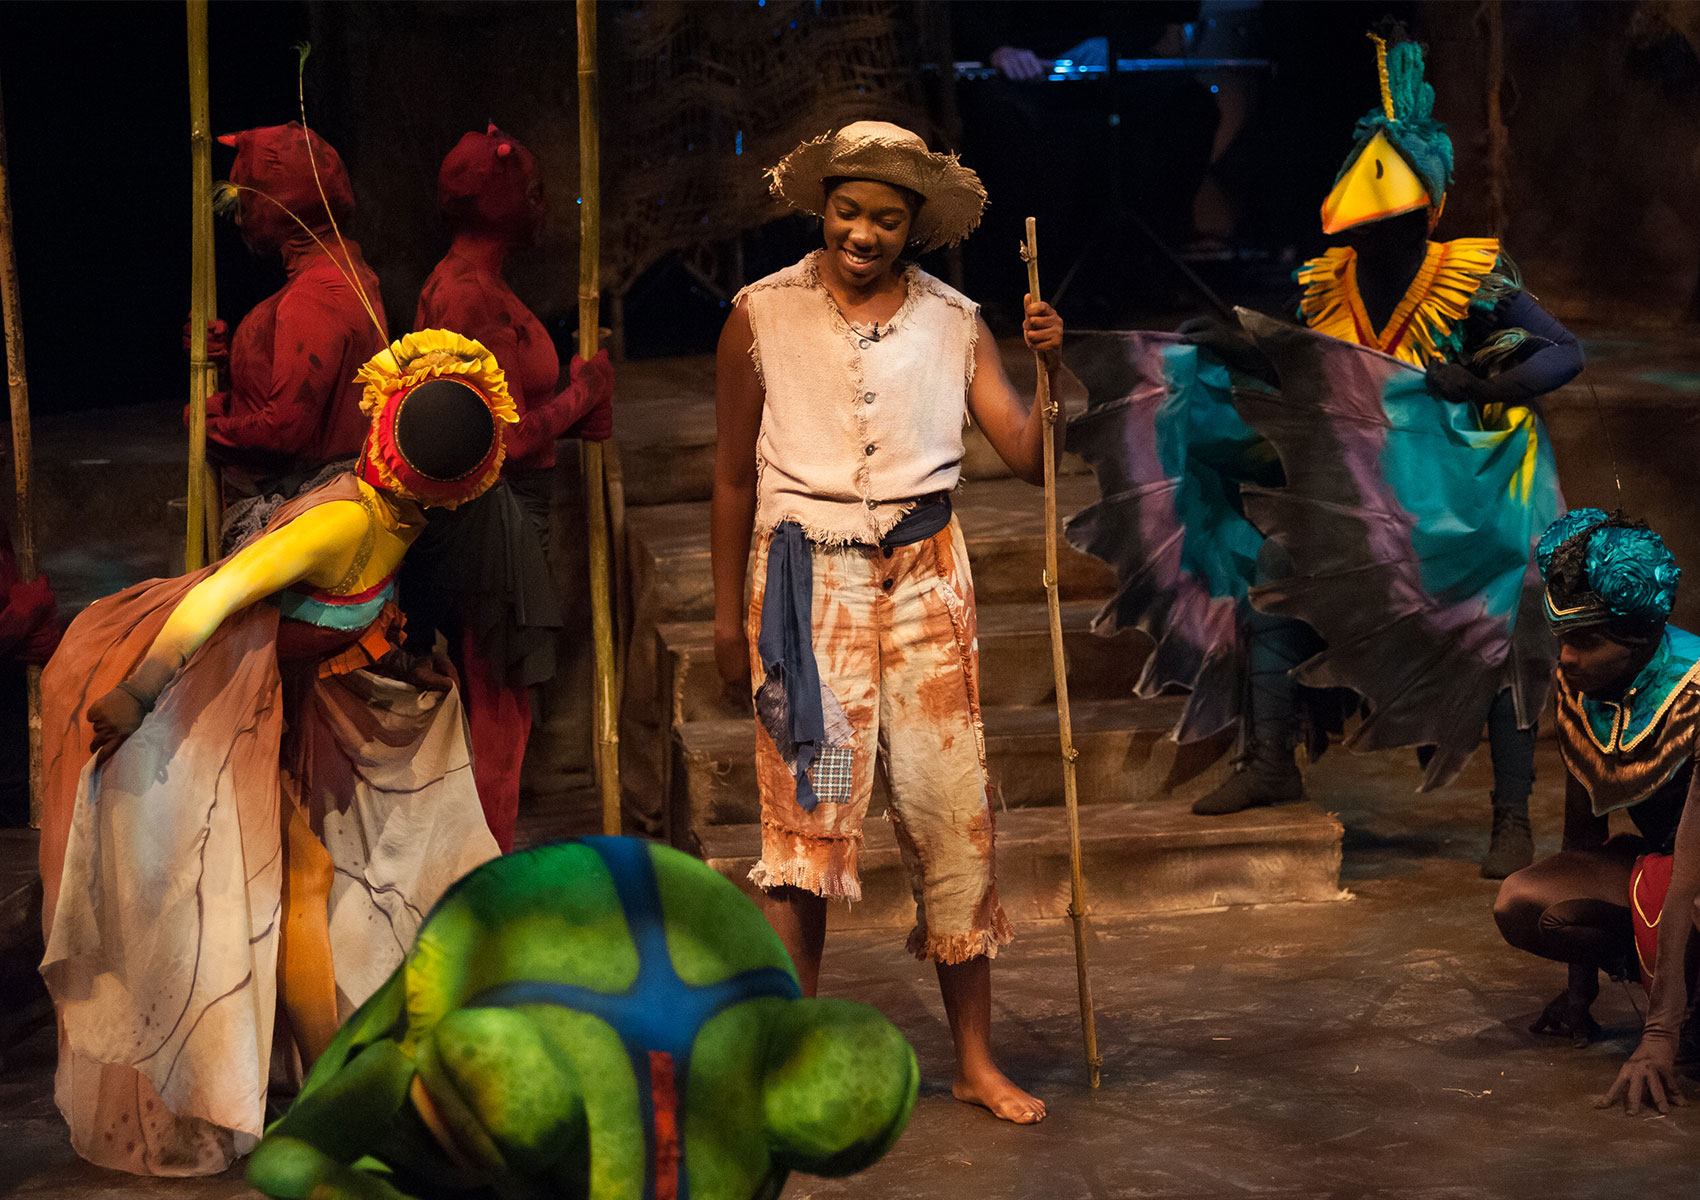 A man dressed as a farmer smiles at characters dressed as a bee and a frog. A character dressed as a bird and another insect watches this exchange while two other characters in red costumes stand back to back behind the farmer holding poles erect. 